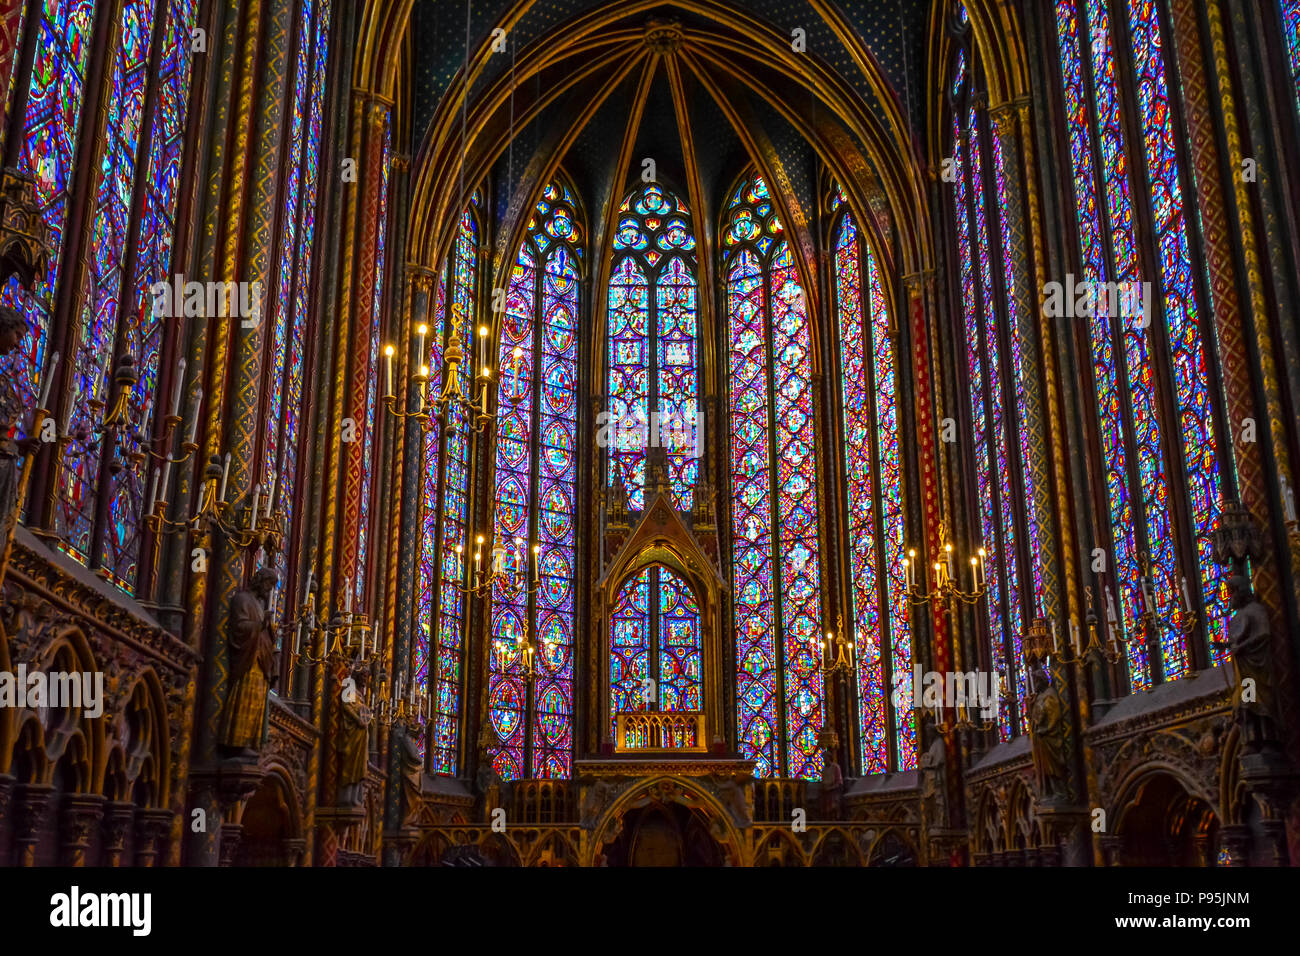 The Chapel section on the upper level of the gothic Sainte-Chapelle Royal Chapel located in the medieval Palais de la Cite in Paris France Stock Photo